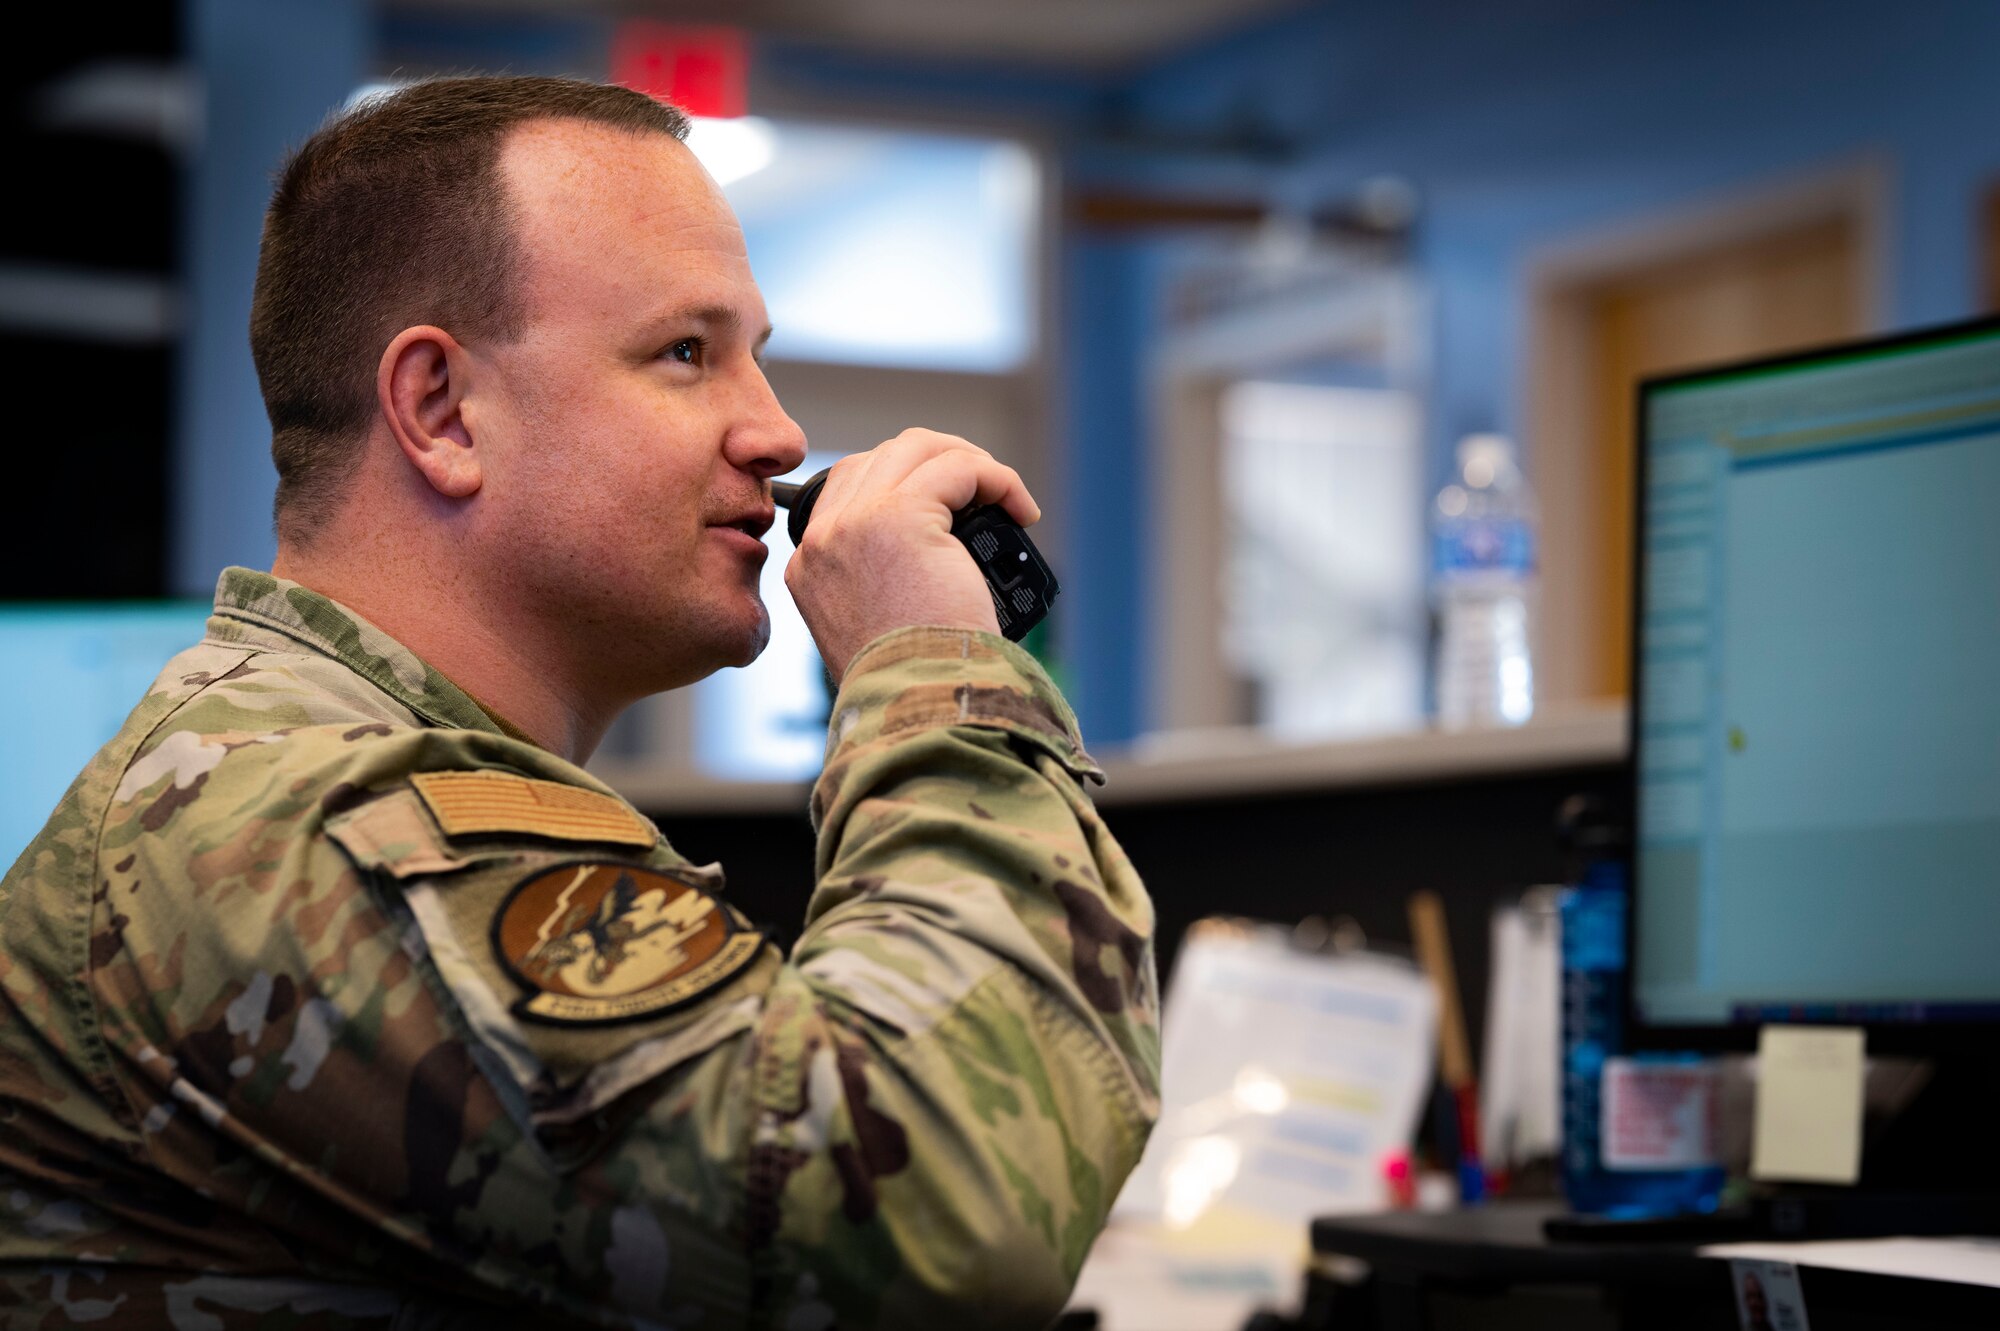 U.S. Air Force Staff. Sgt. Nicholas Clum, 314th Fighter Squadron aviation resource management noncommissioned officer in charge, does a radio check at Holloman Air Force Base, New Mexico, Aug. 29, 2023. Holloman’s SARMs are responsible for managing pilot schedules, aircraft maintenance, and mission coordination, ensuring that no detail is overlooked. (U.S. Air Force photo by Airman 1st Class Isaiah Pedrazzini)